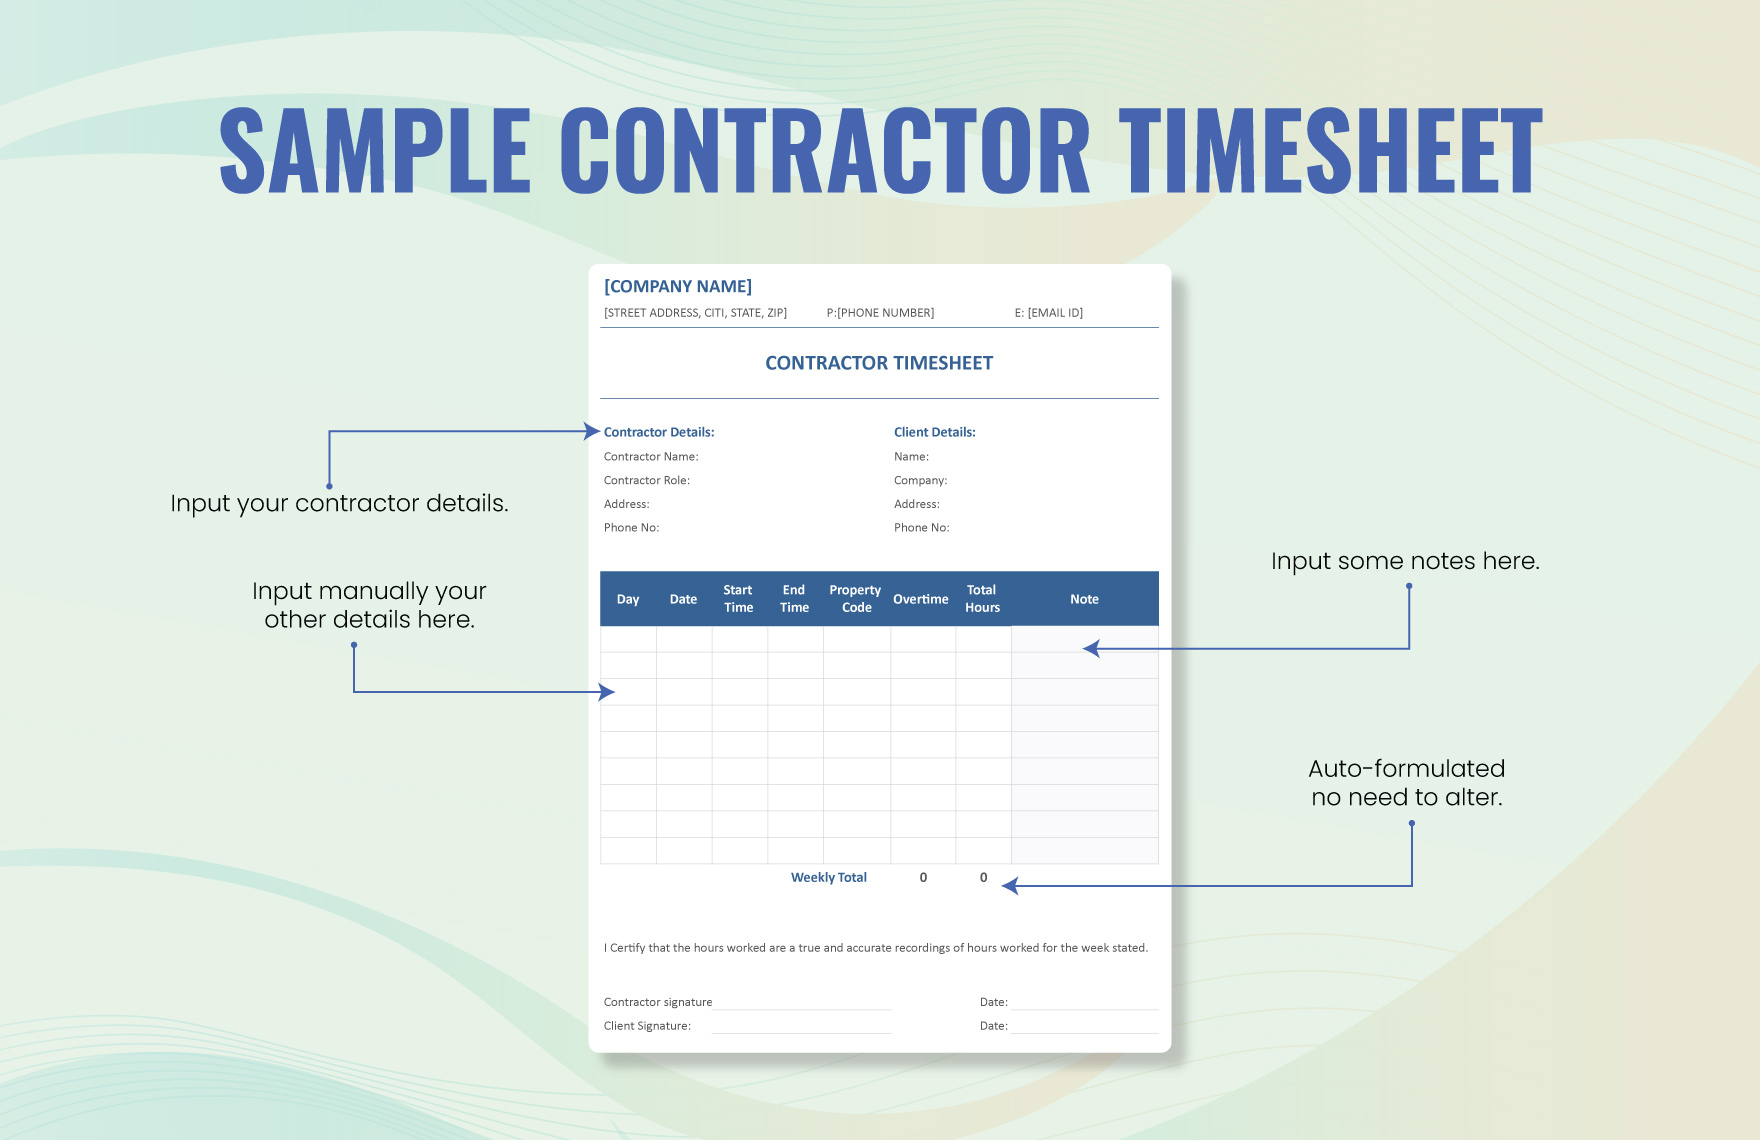 Sample Contractor Timesheet Template